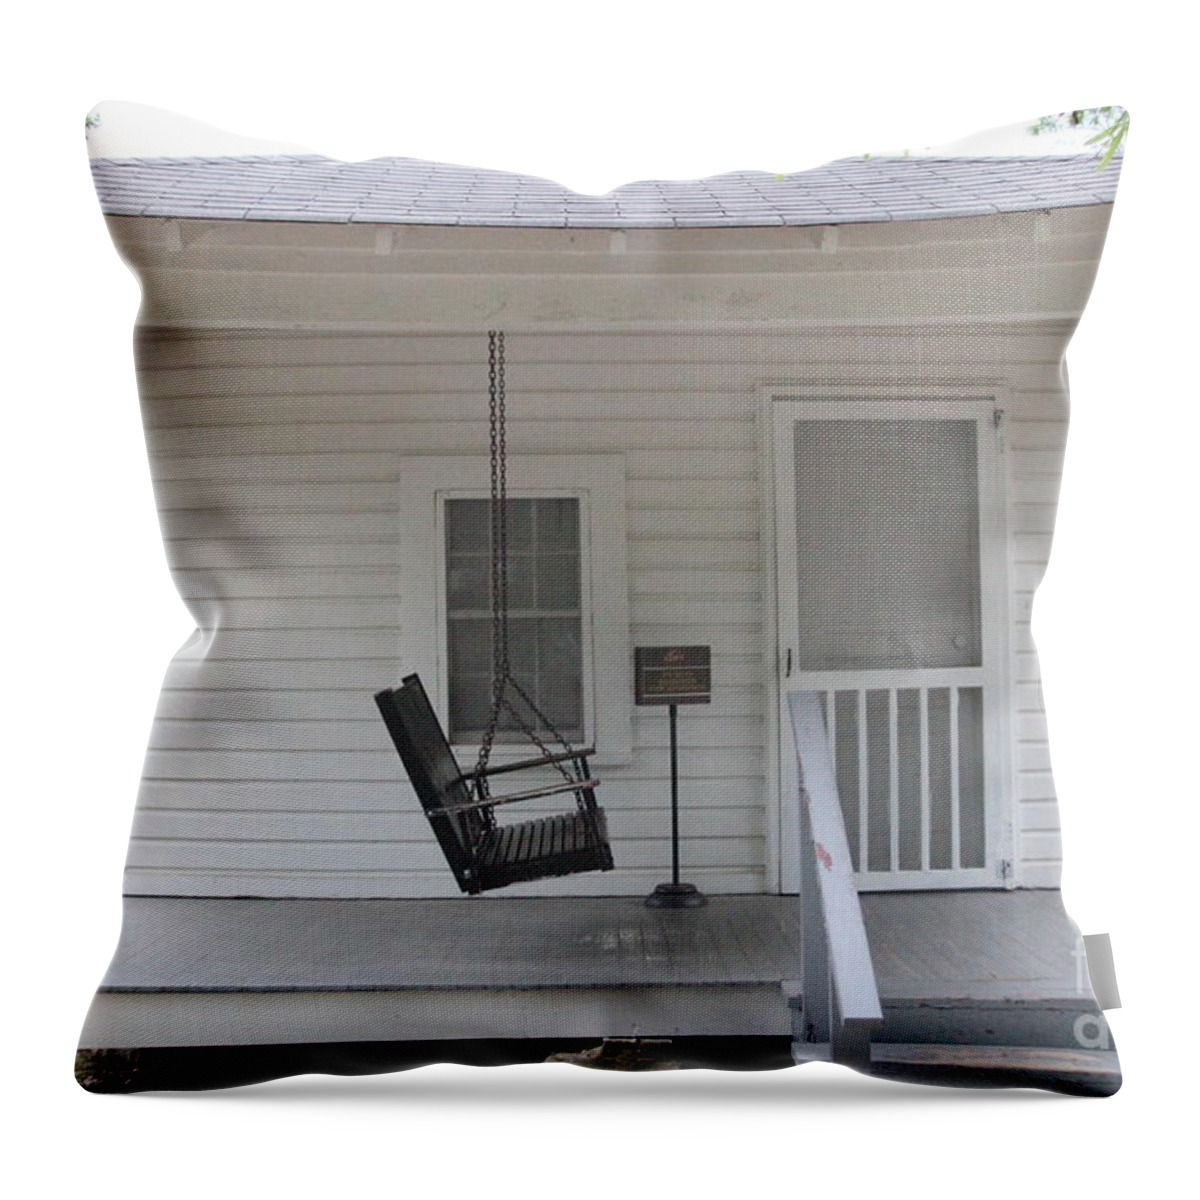 Elvis Throw Pillow featuring the photograph Elvis Birthplace Tupelo Mississippi by Chuck Kuhn